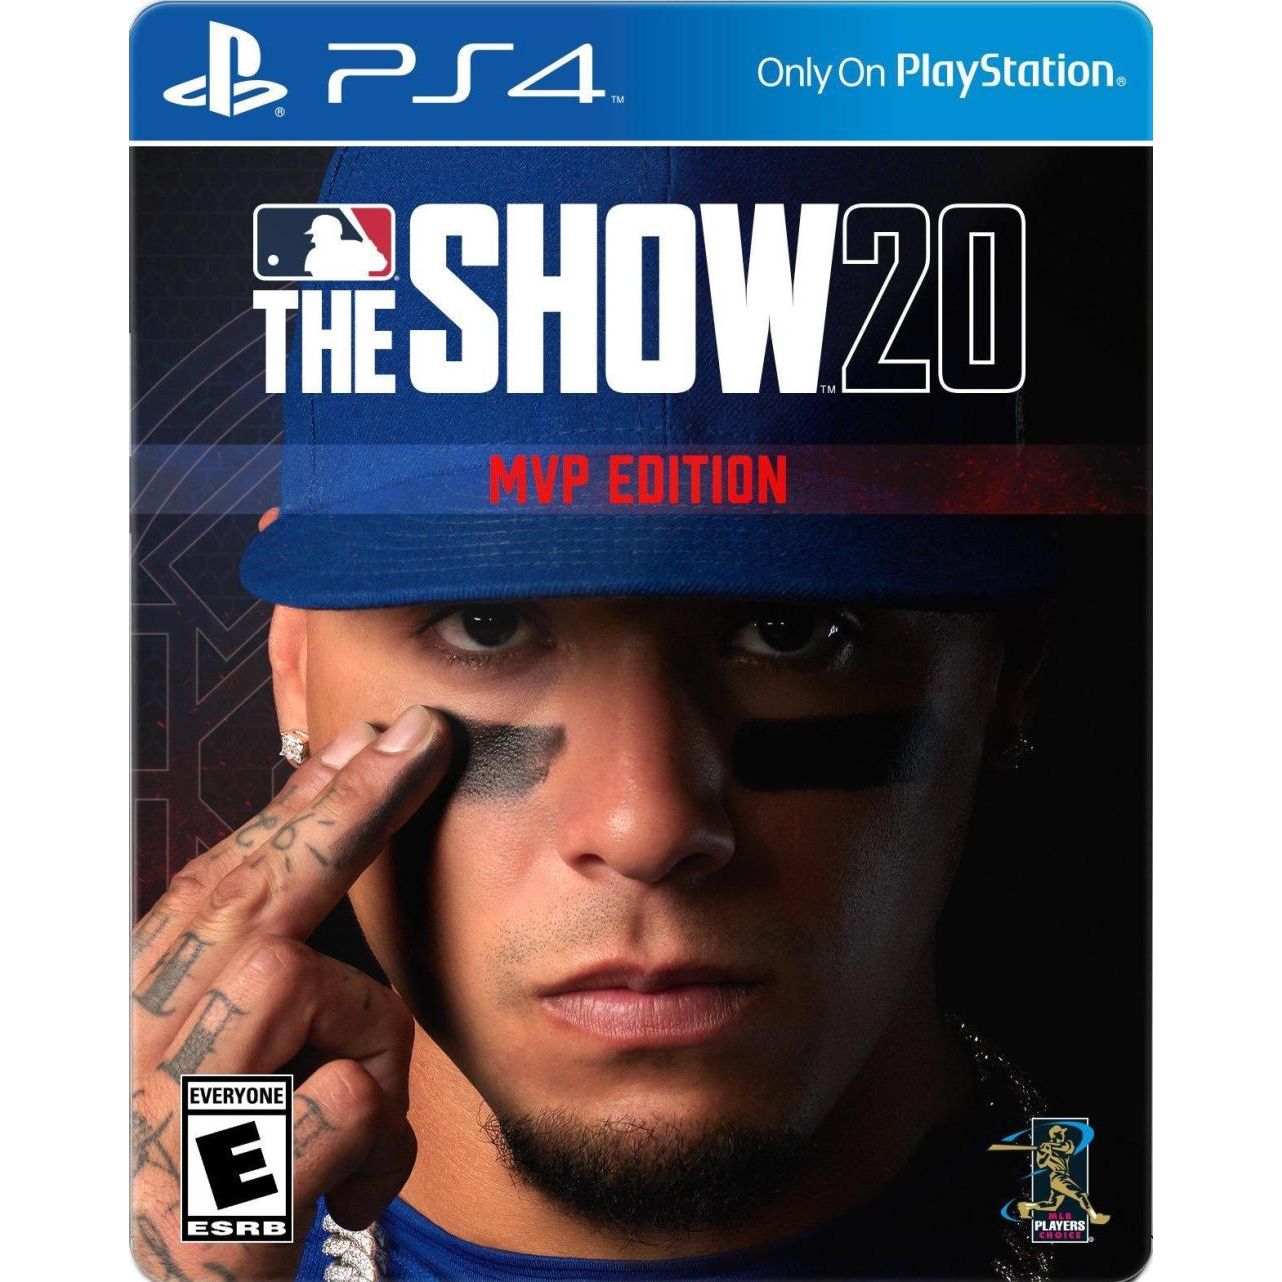 PS4 - MLB The Show 20 MVP Edition